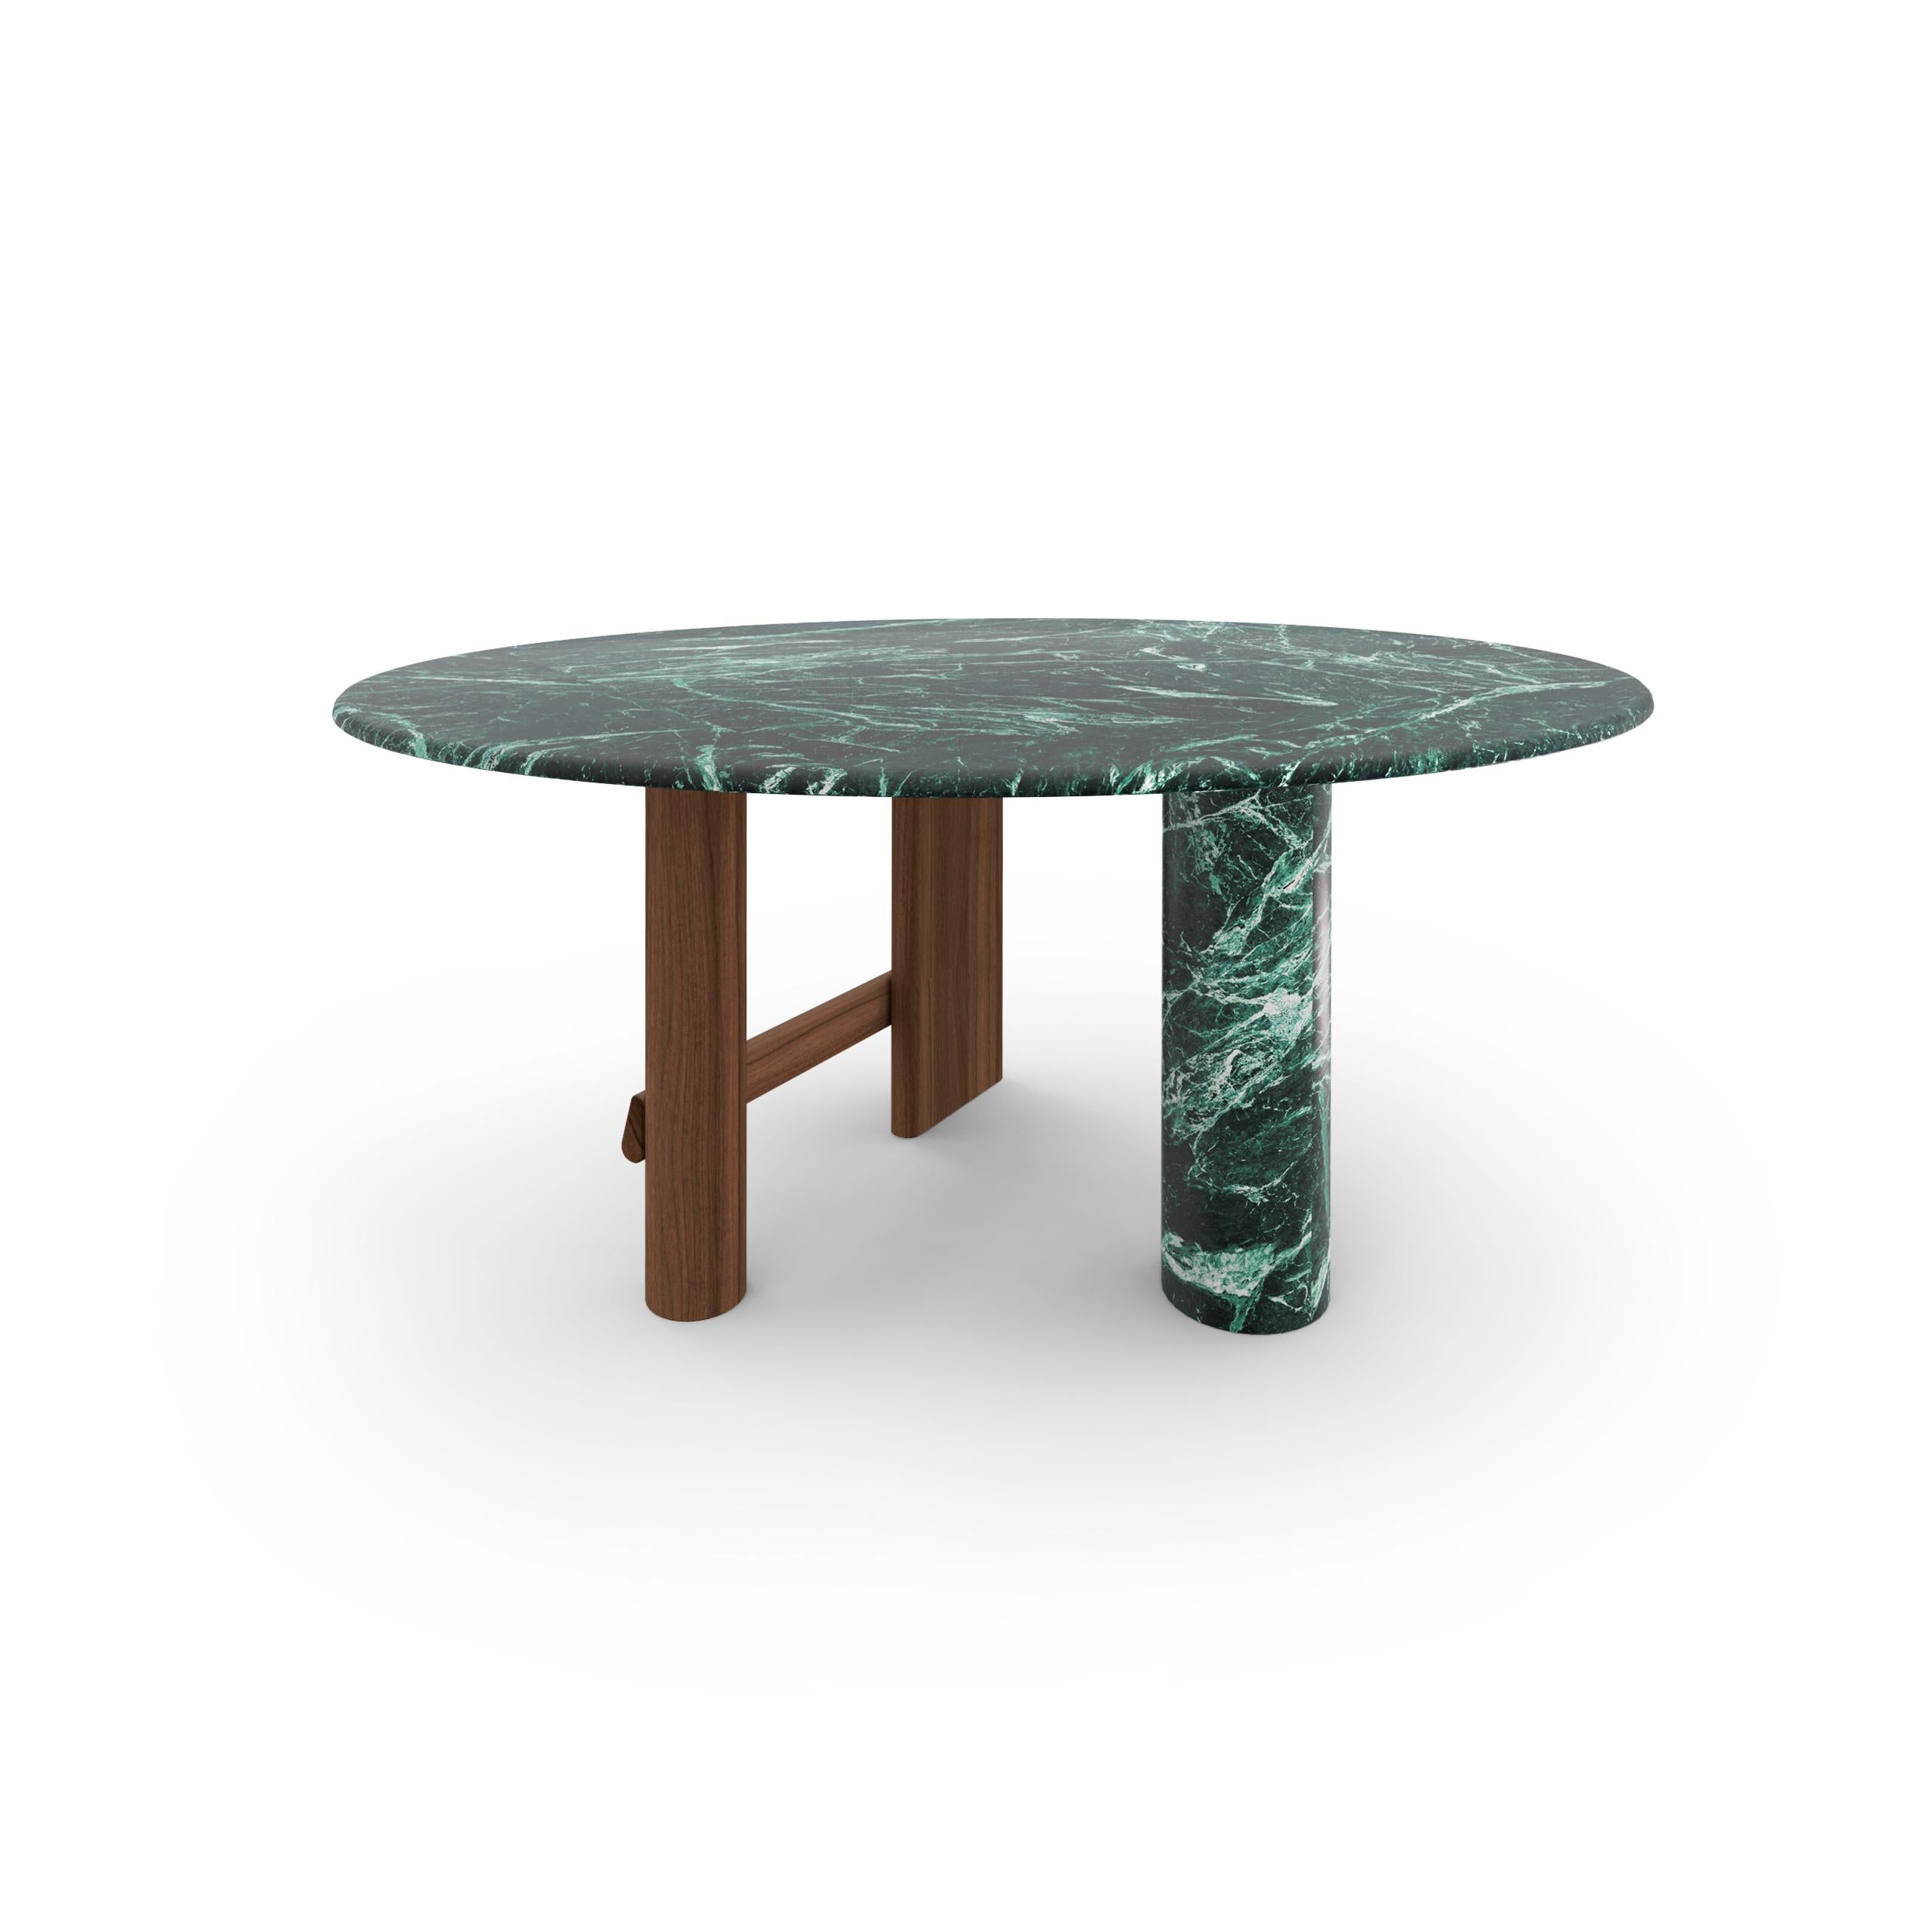 Sengu Dining Table designed by Patricia Urquiola.
Manufactured by Cassina (Italy).

LIGHT-HEARTED POETRY
A design dining room table inspired by the ritual reconstruction of Japanese shrines, a contemporary piece that celebrates light-hearted cheer